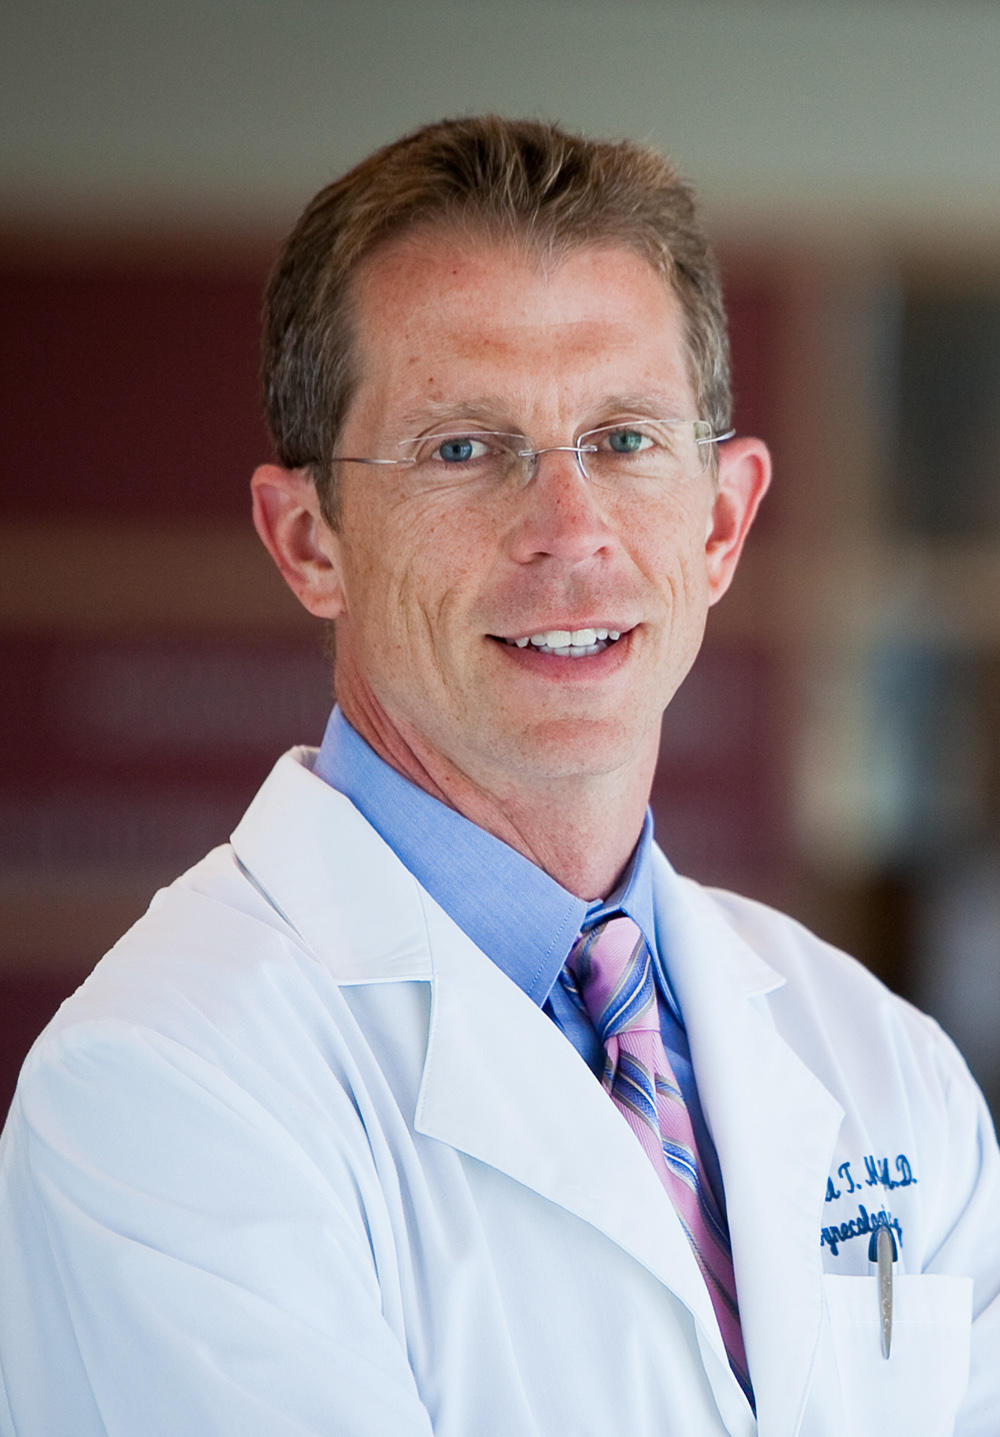 Dr. Michael Mchale, MD - San Diego, CA - Gynecologist, Oncologist